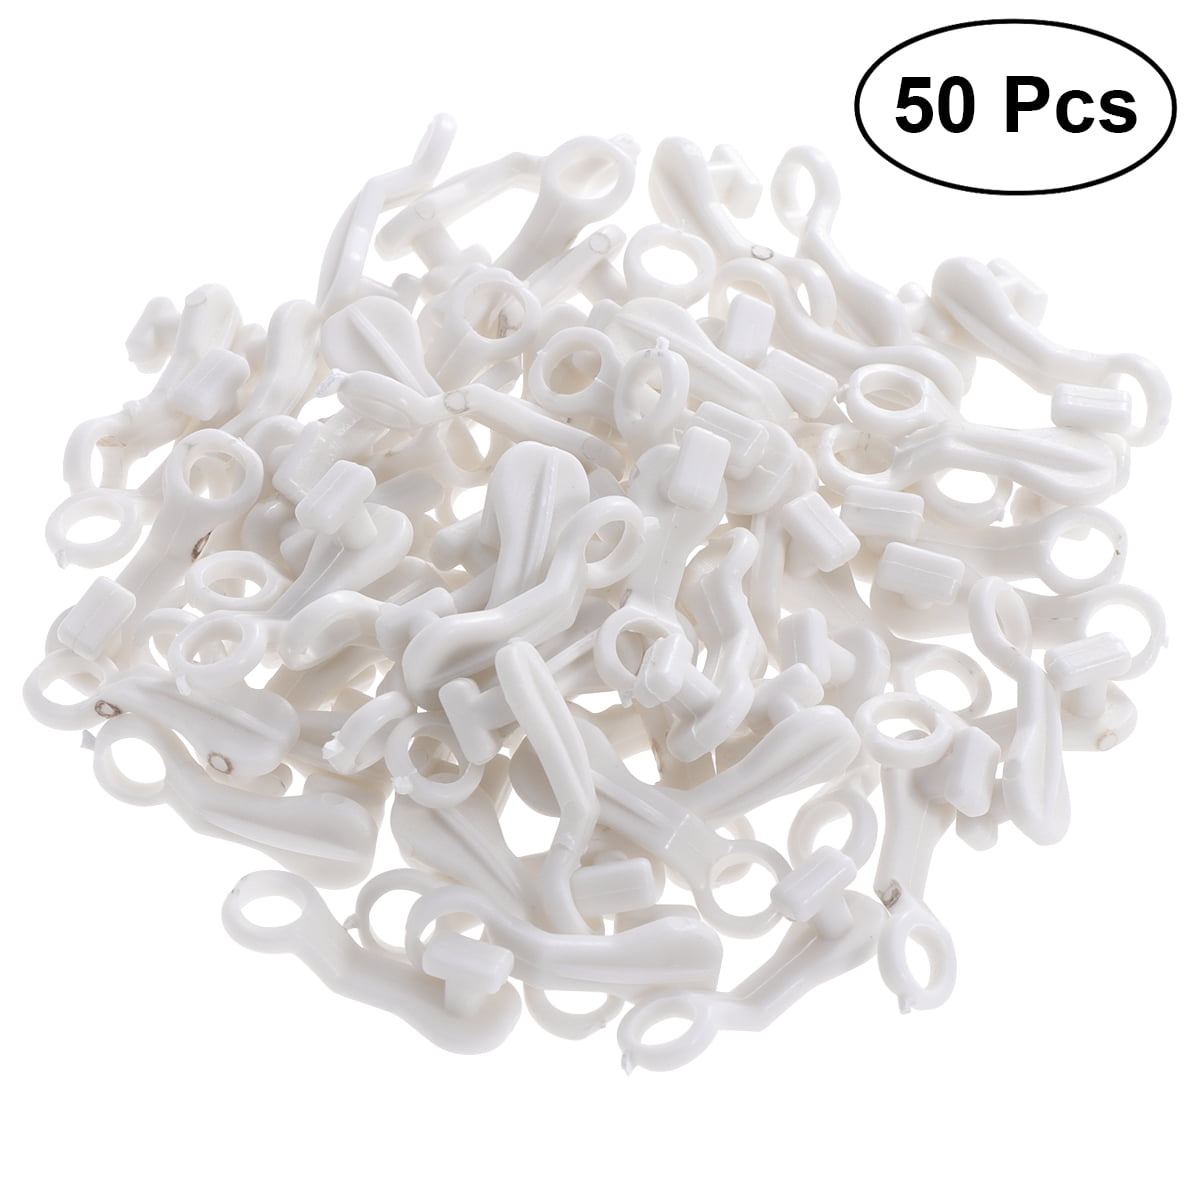 50-200pcs Curtain Track Gliders Glide Hooks Runners Slides Fixing Replacement